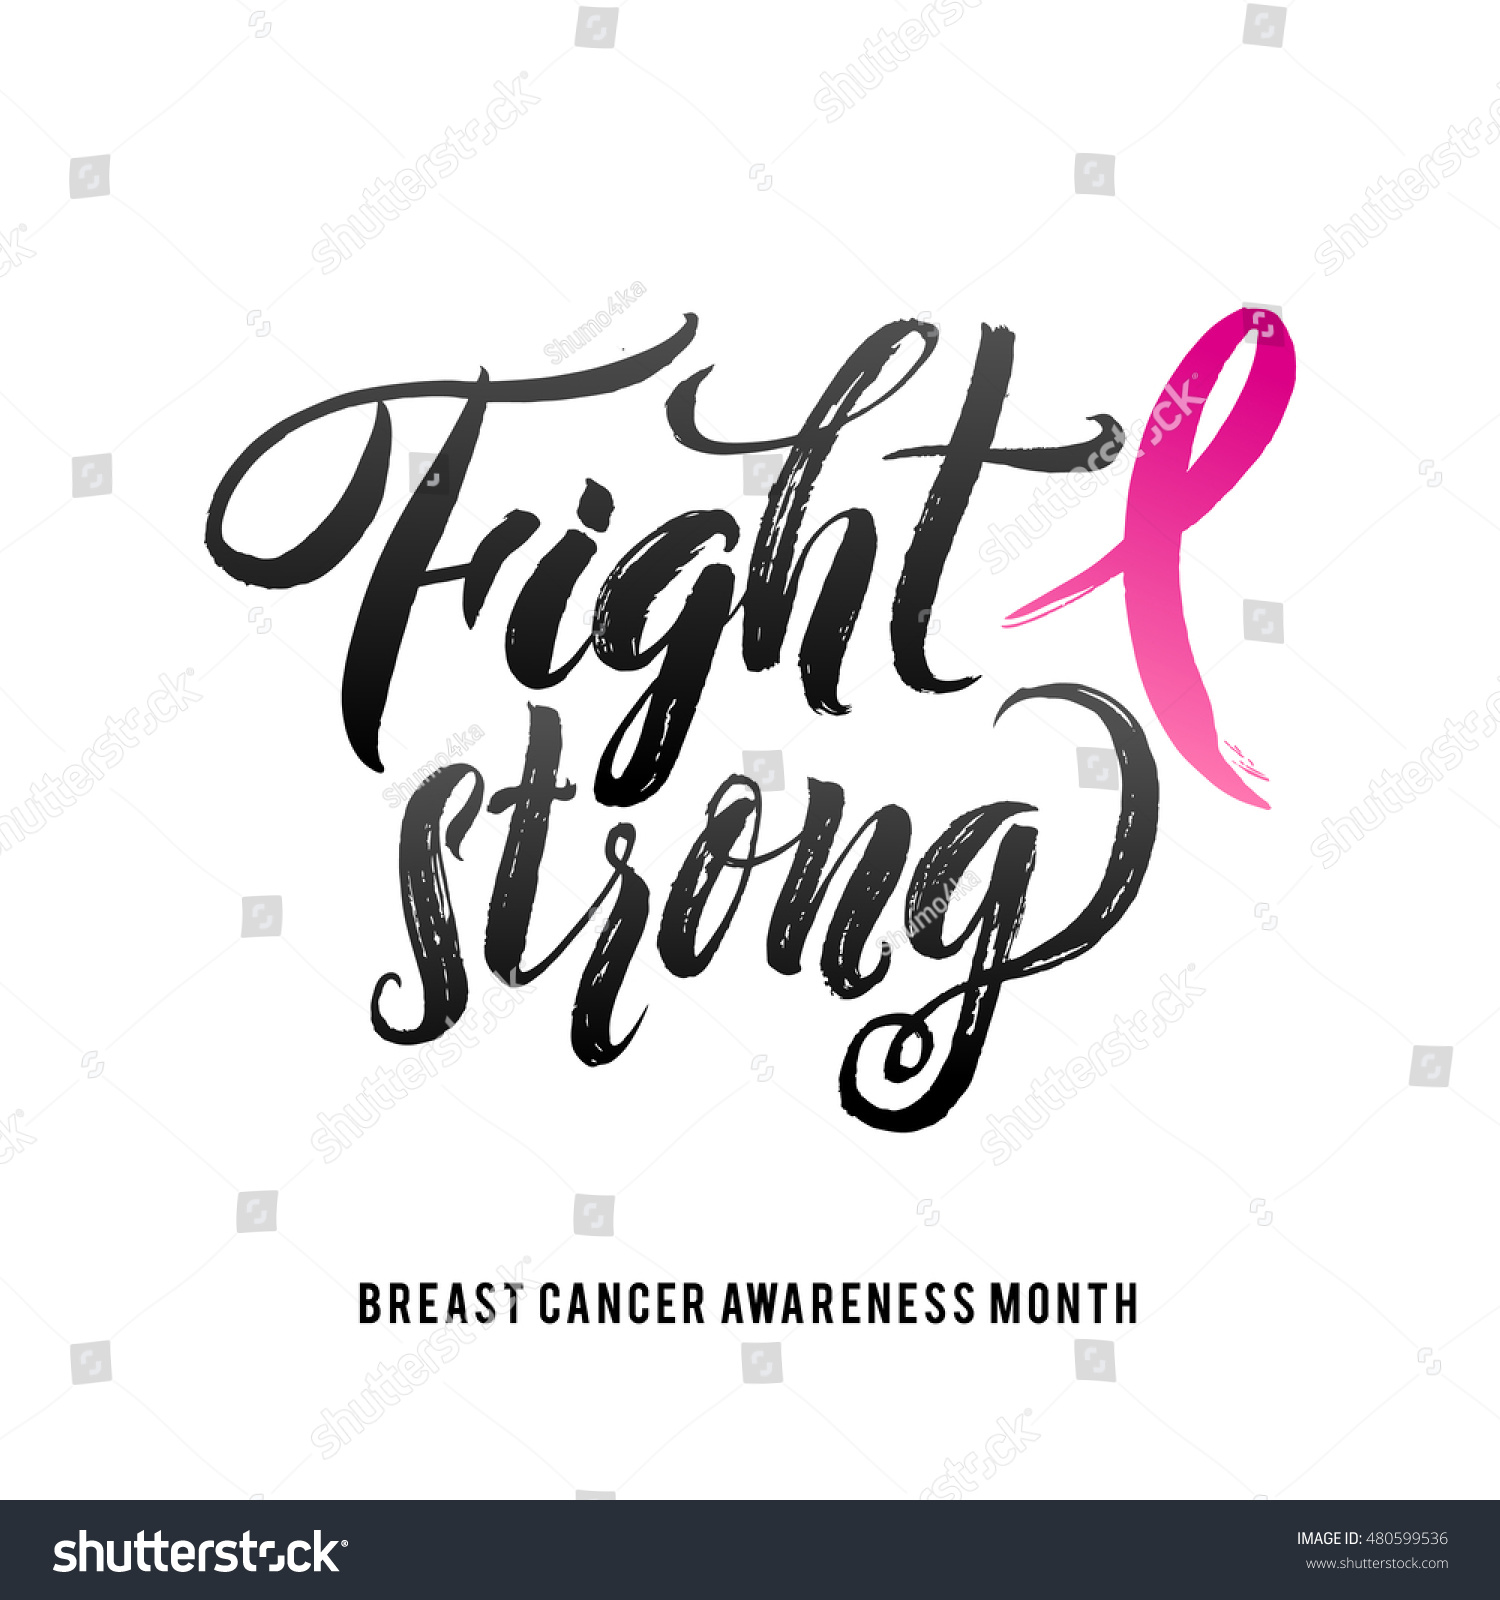 Fight Cancer Vector Breast Cancer Awareness Stock Vector (Royalty Free ...